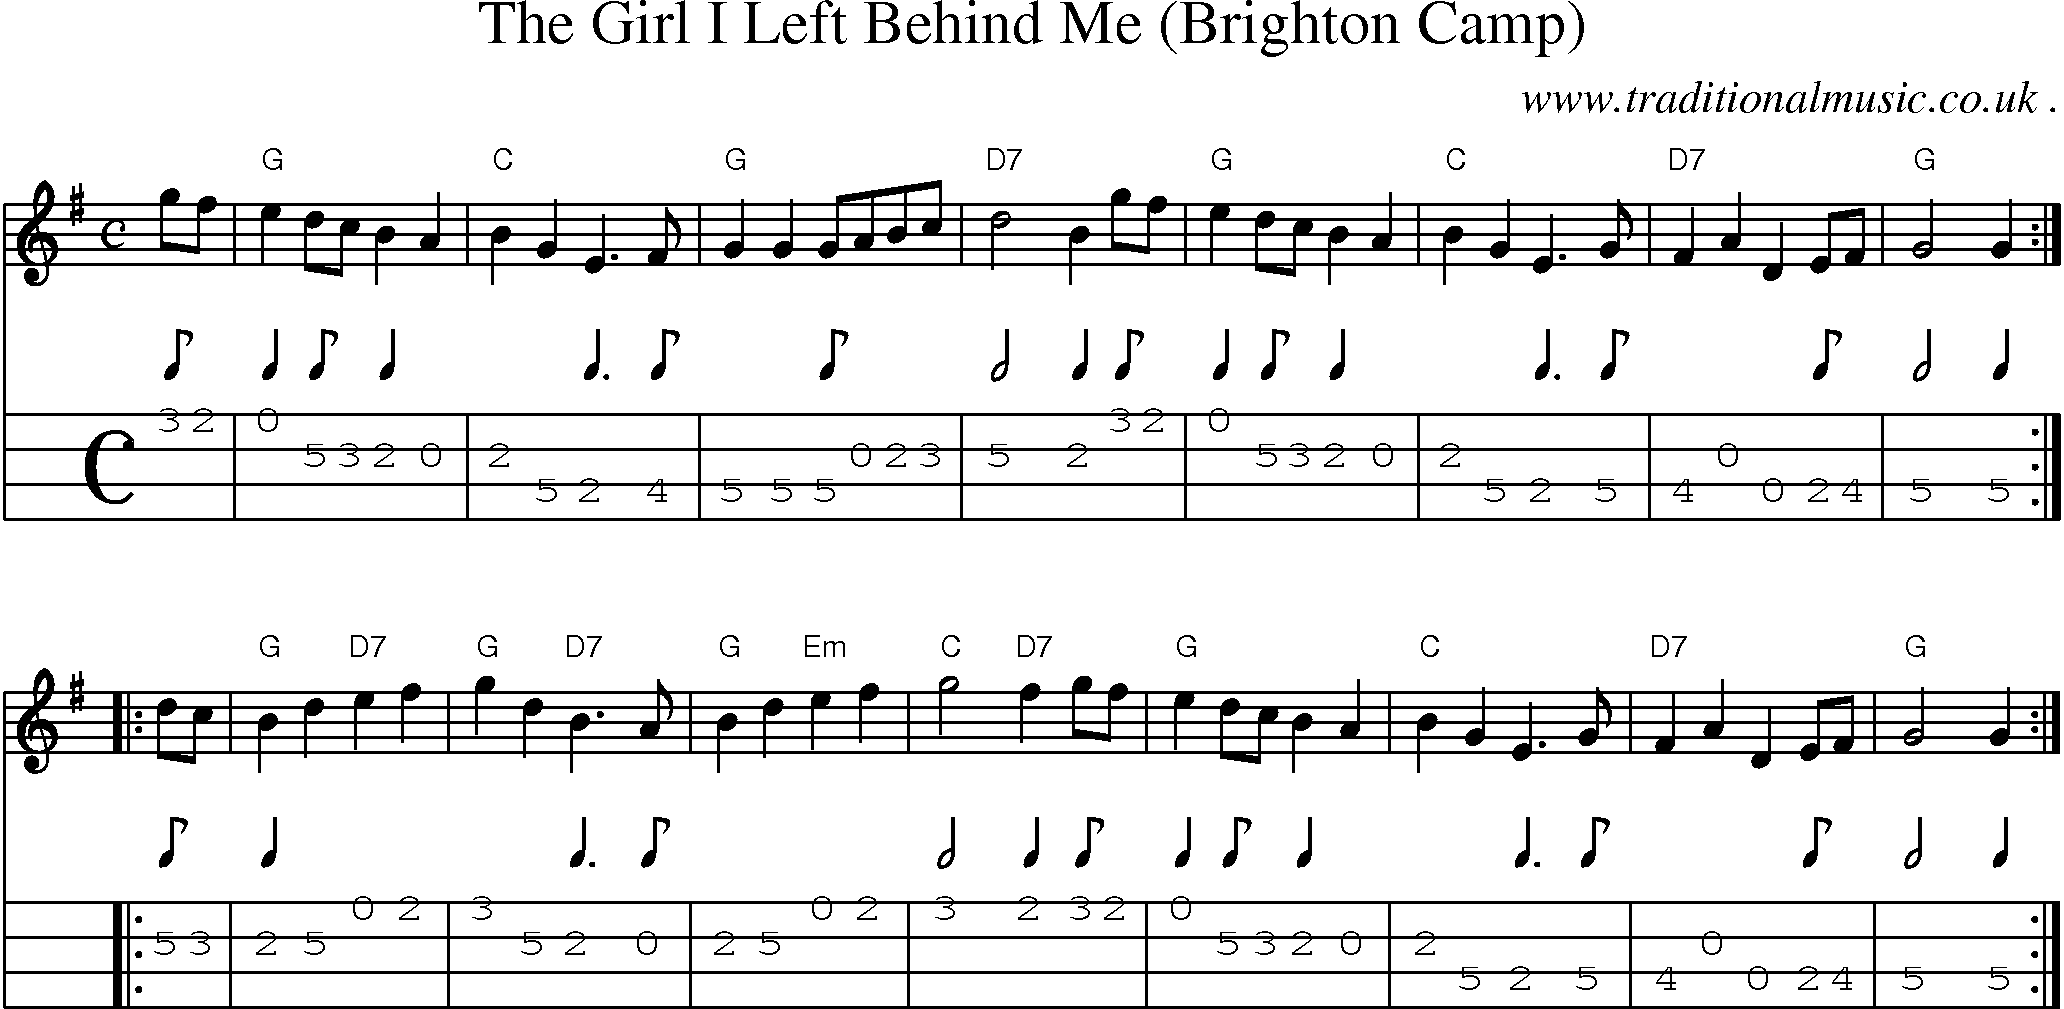 Sheet-music  score, Chords and Mandolin Tabs for The Girl I Left Behind Me Brighton Camp